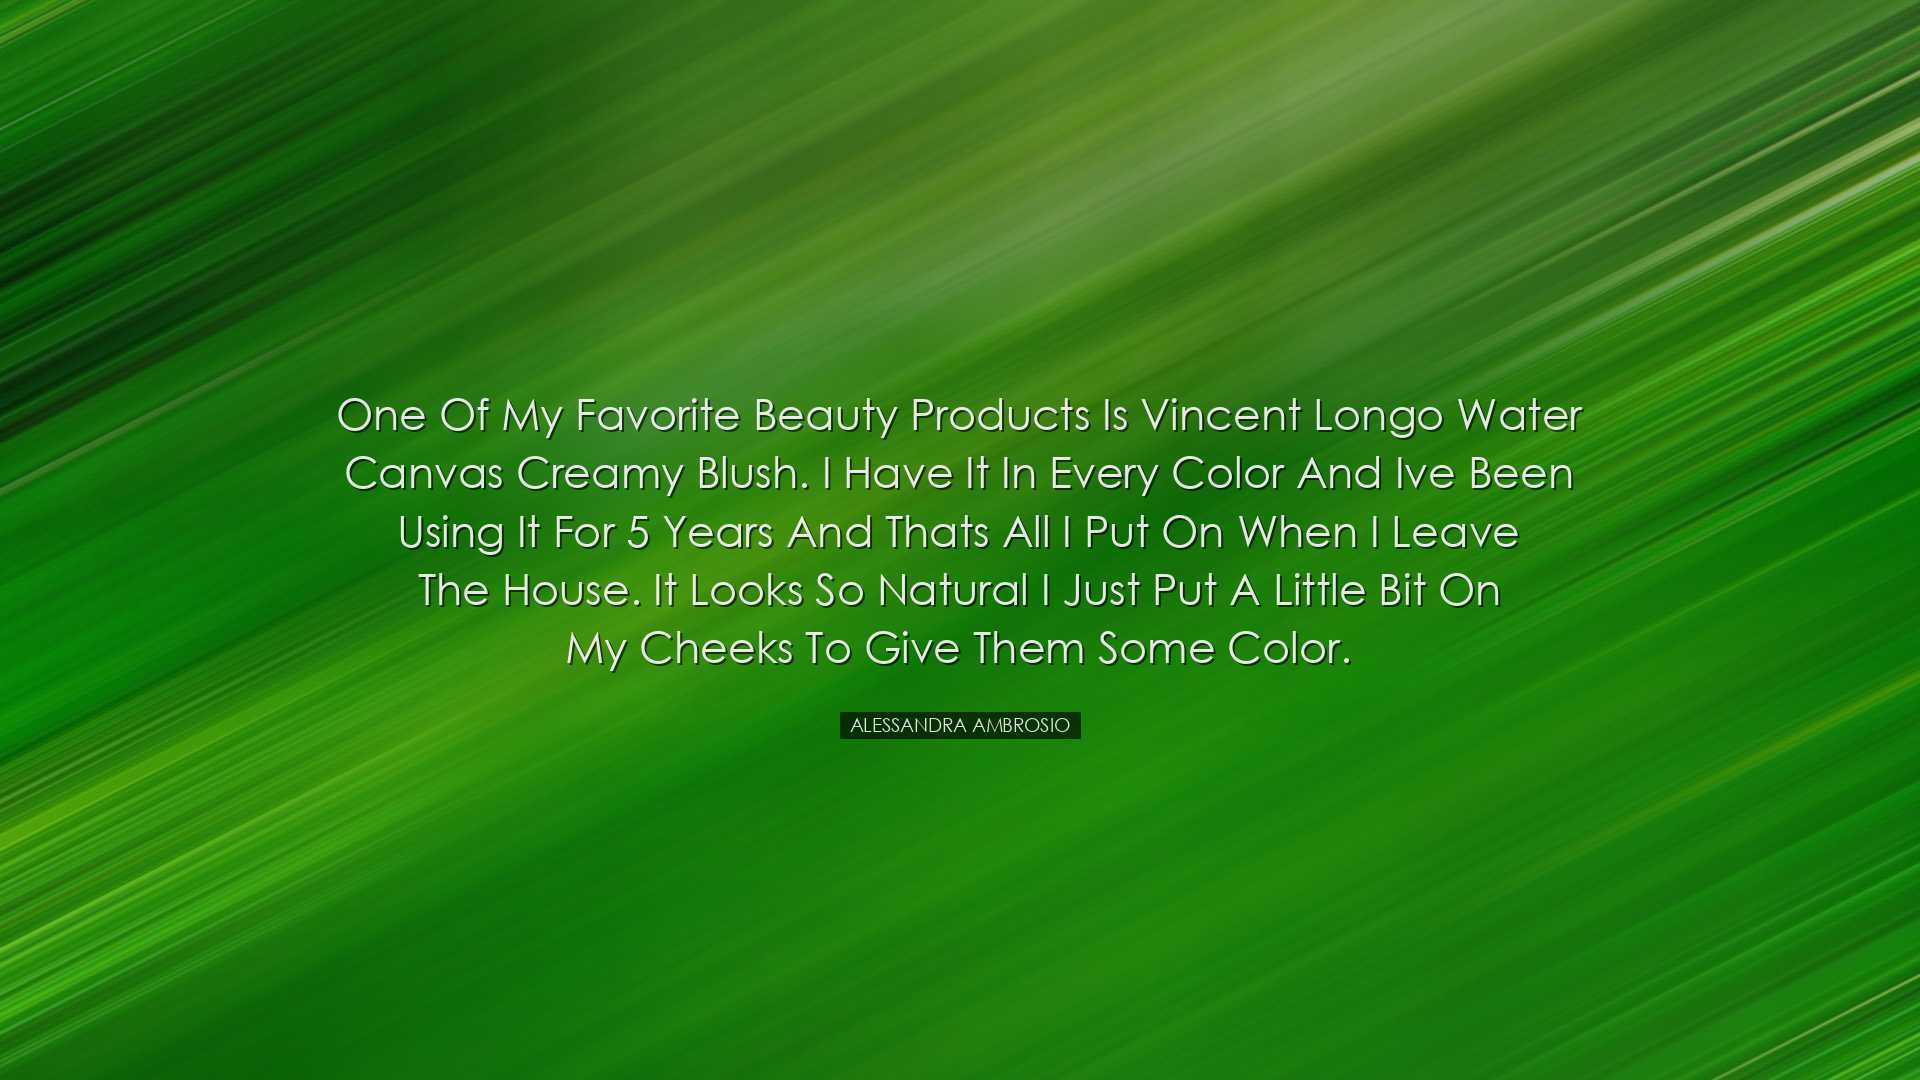 One of my favorite beauty products is Vincent Longo Water Canvas c